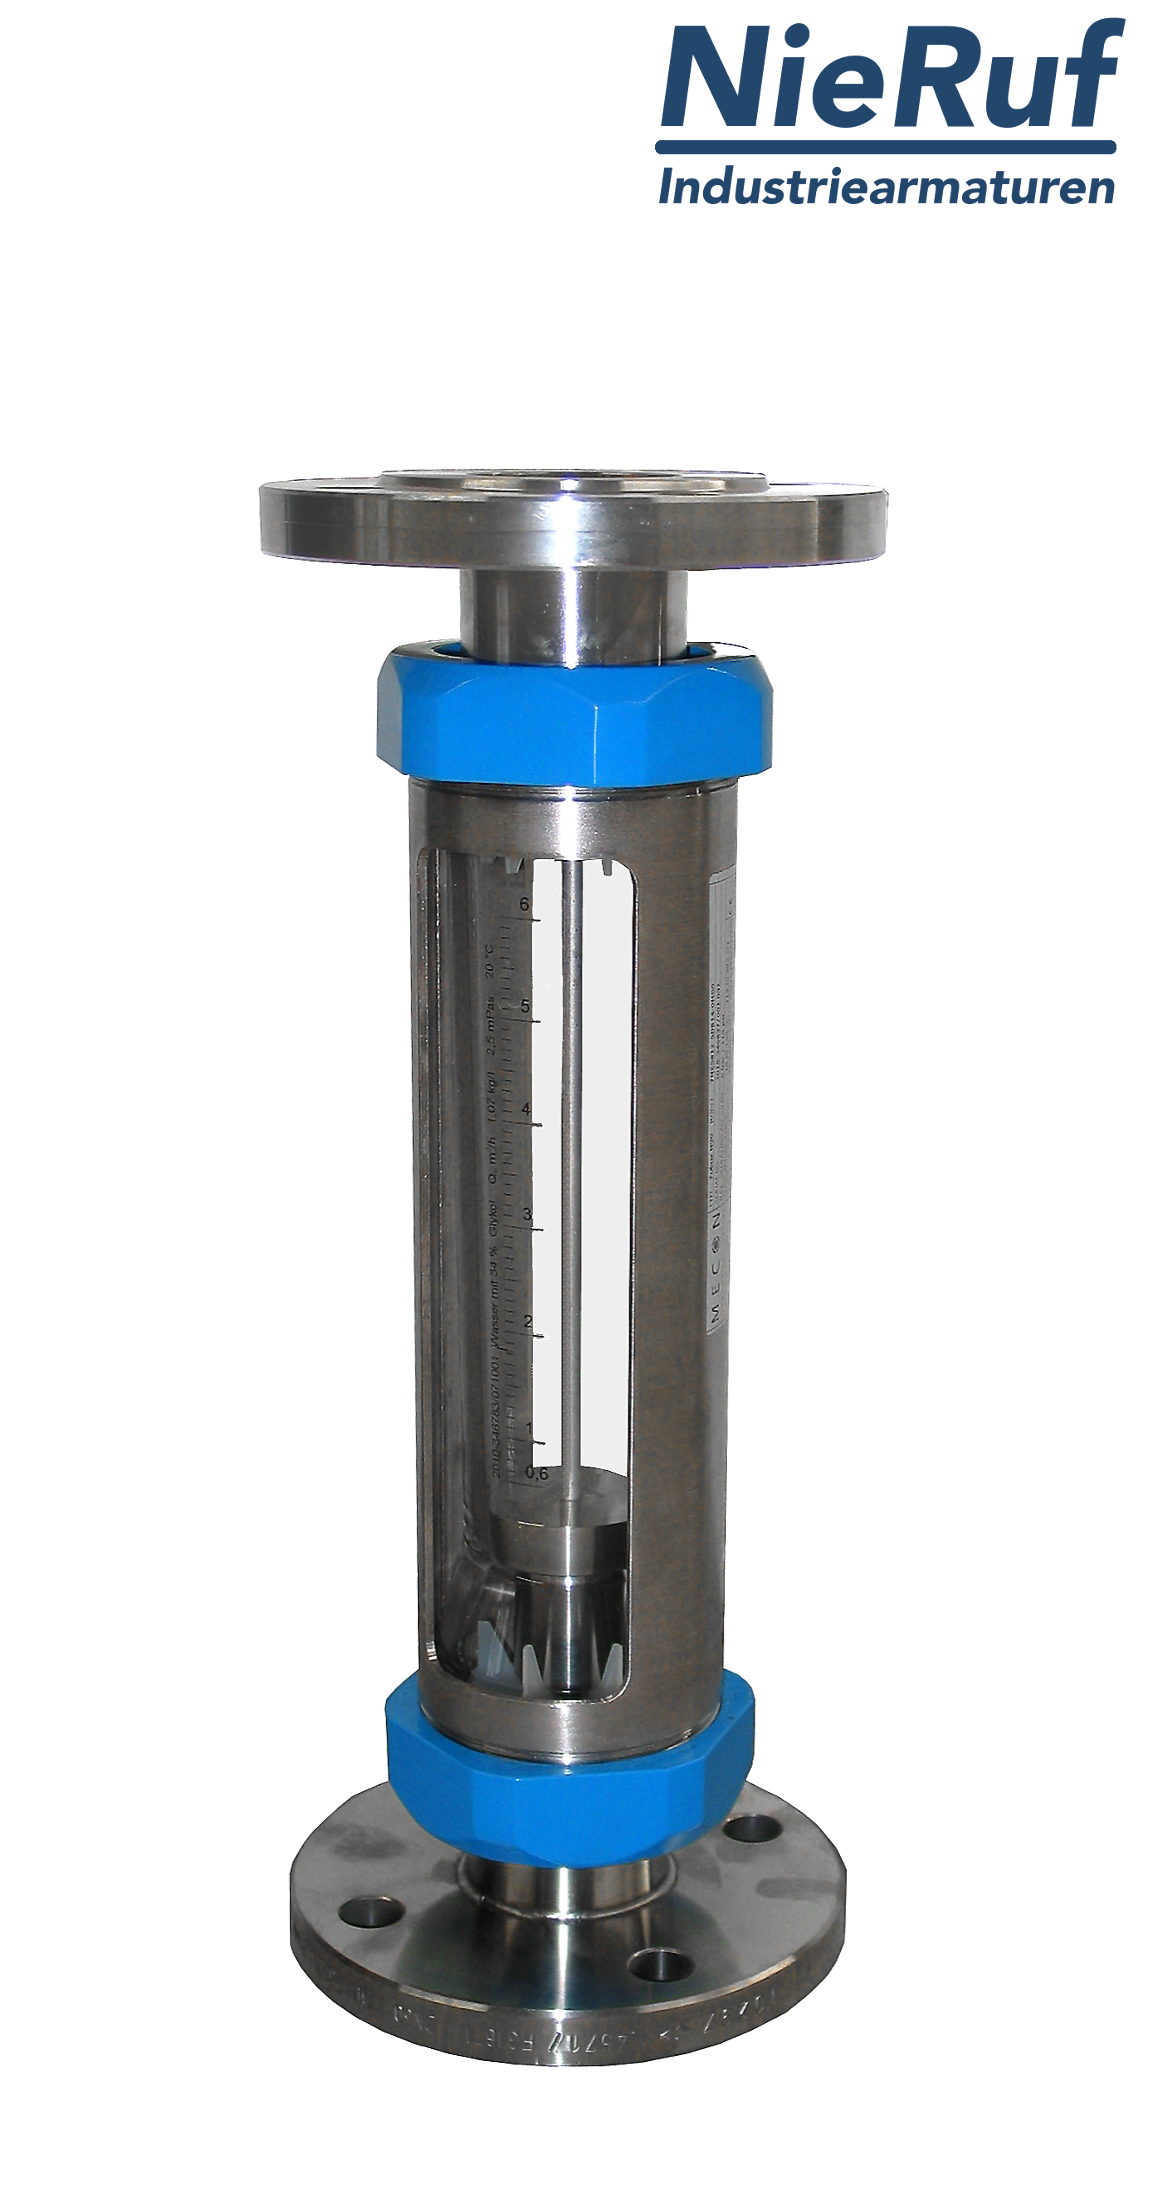 Variable area flowmeter stainless steel + borosilicate flange DN15 5.0 - 50.0 l/h water FKM